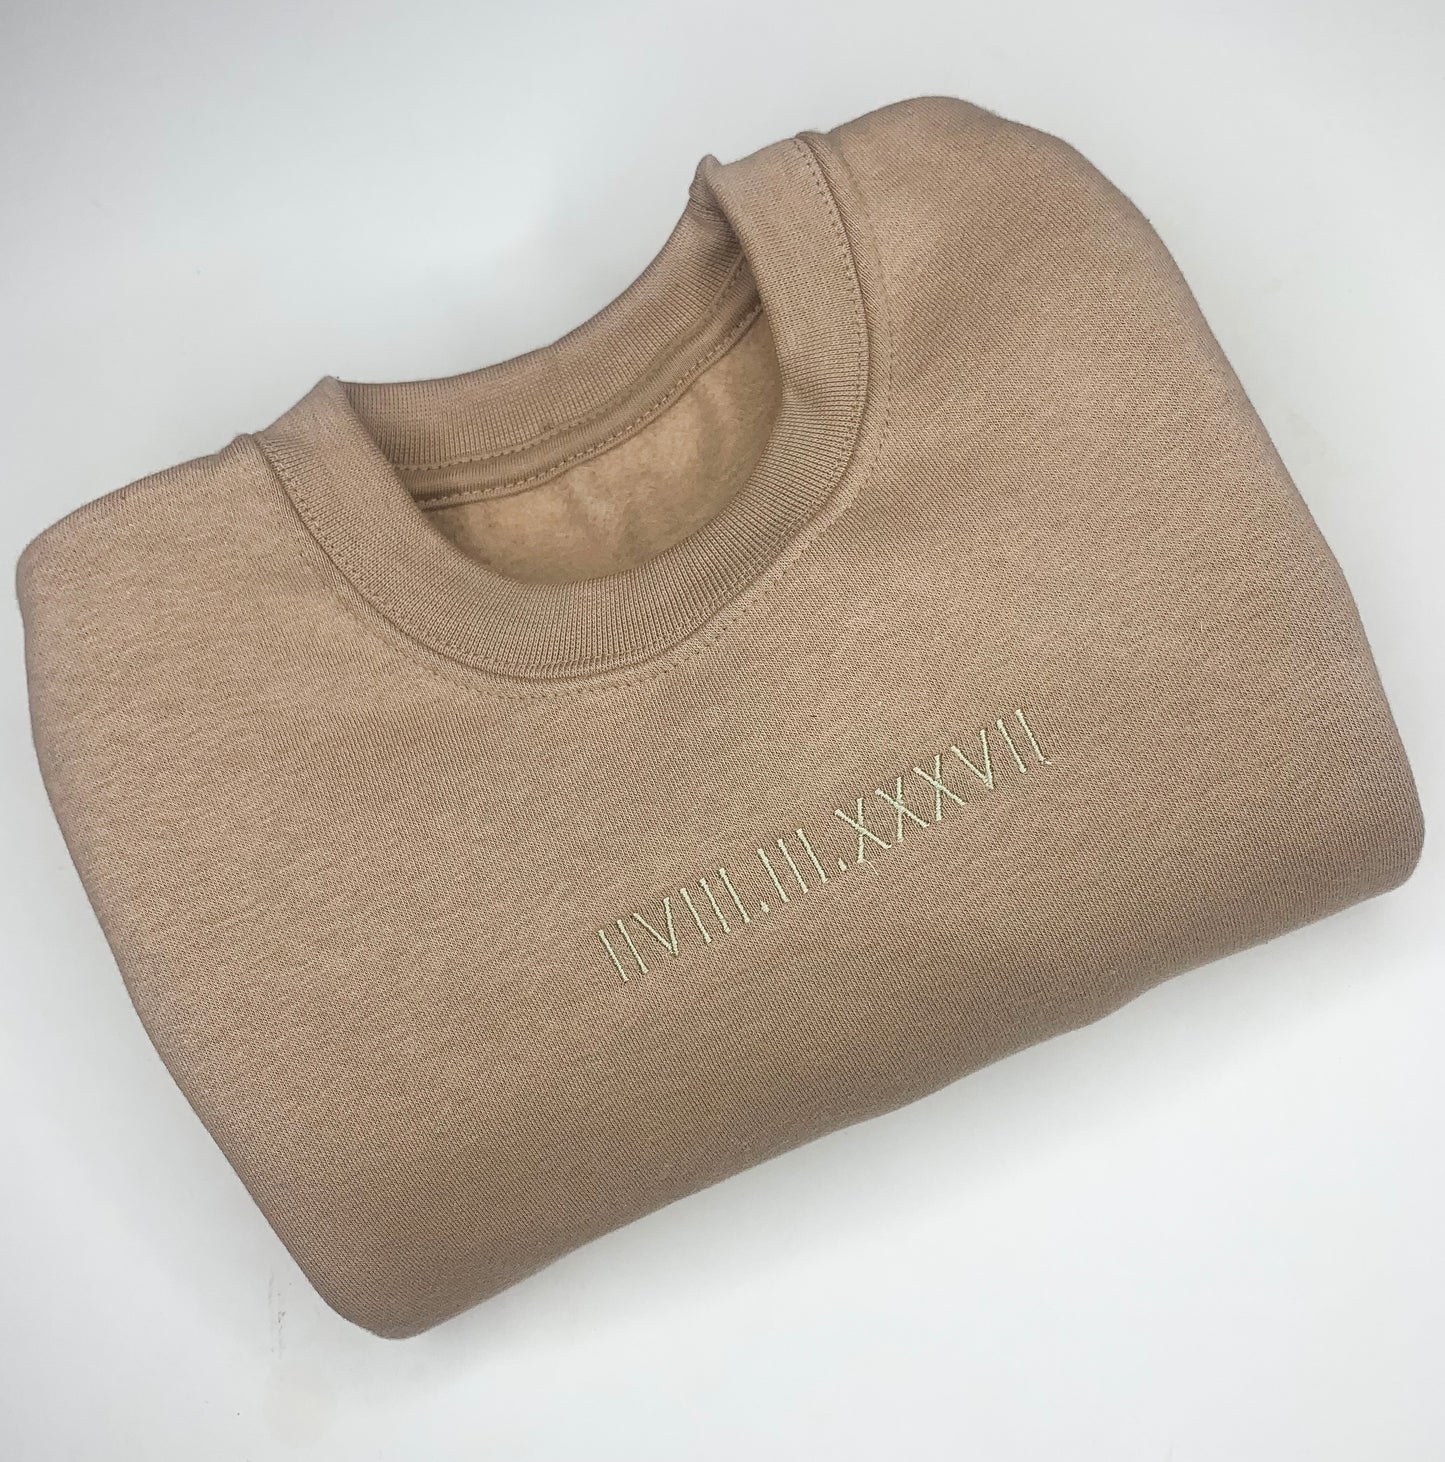 Taupe Sweatshirt with Roman Numerals Date of Birth